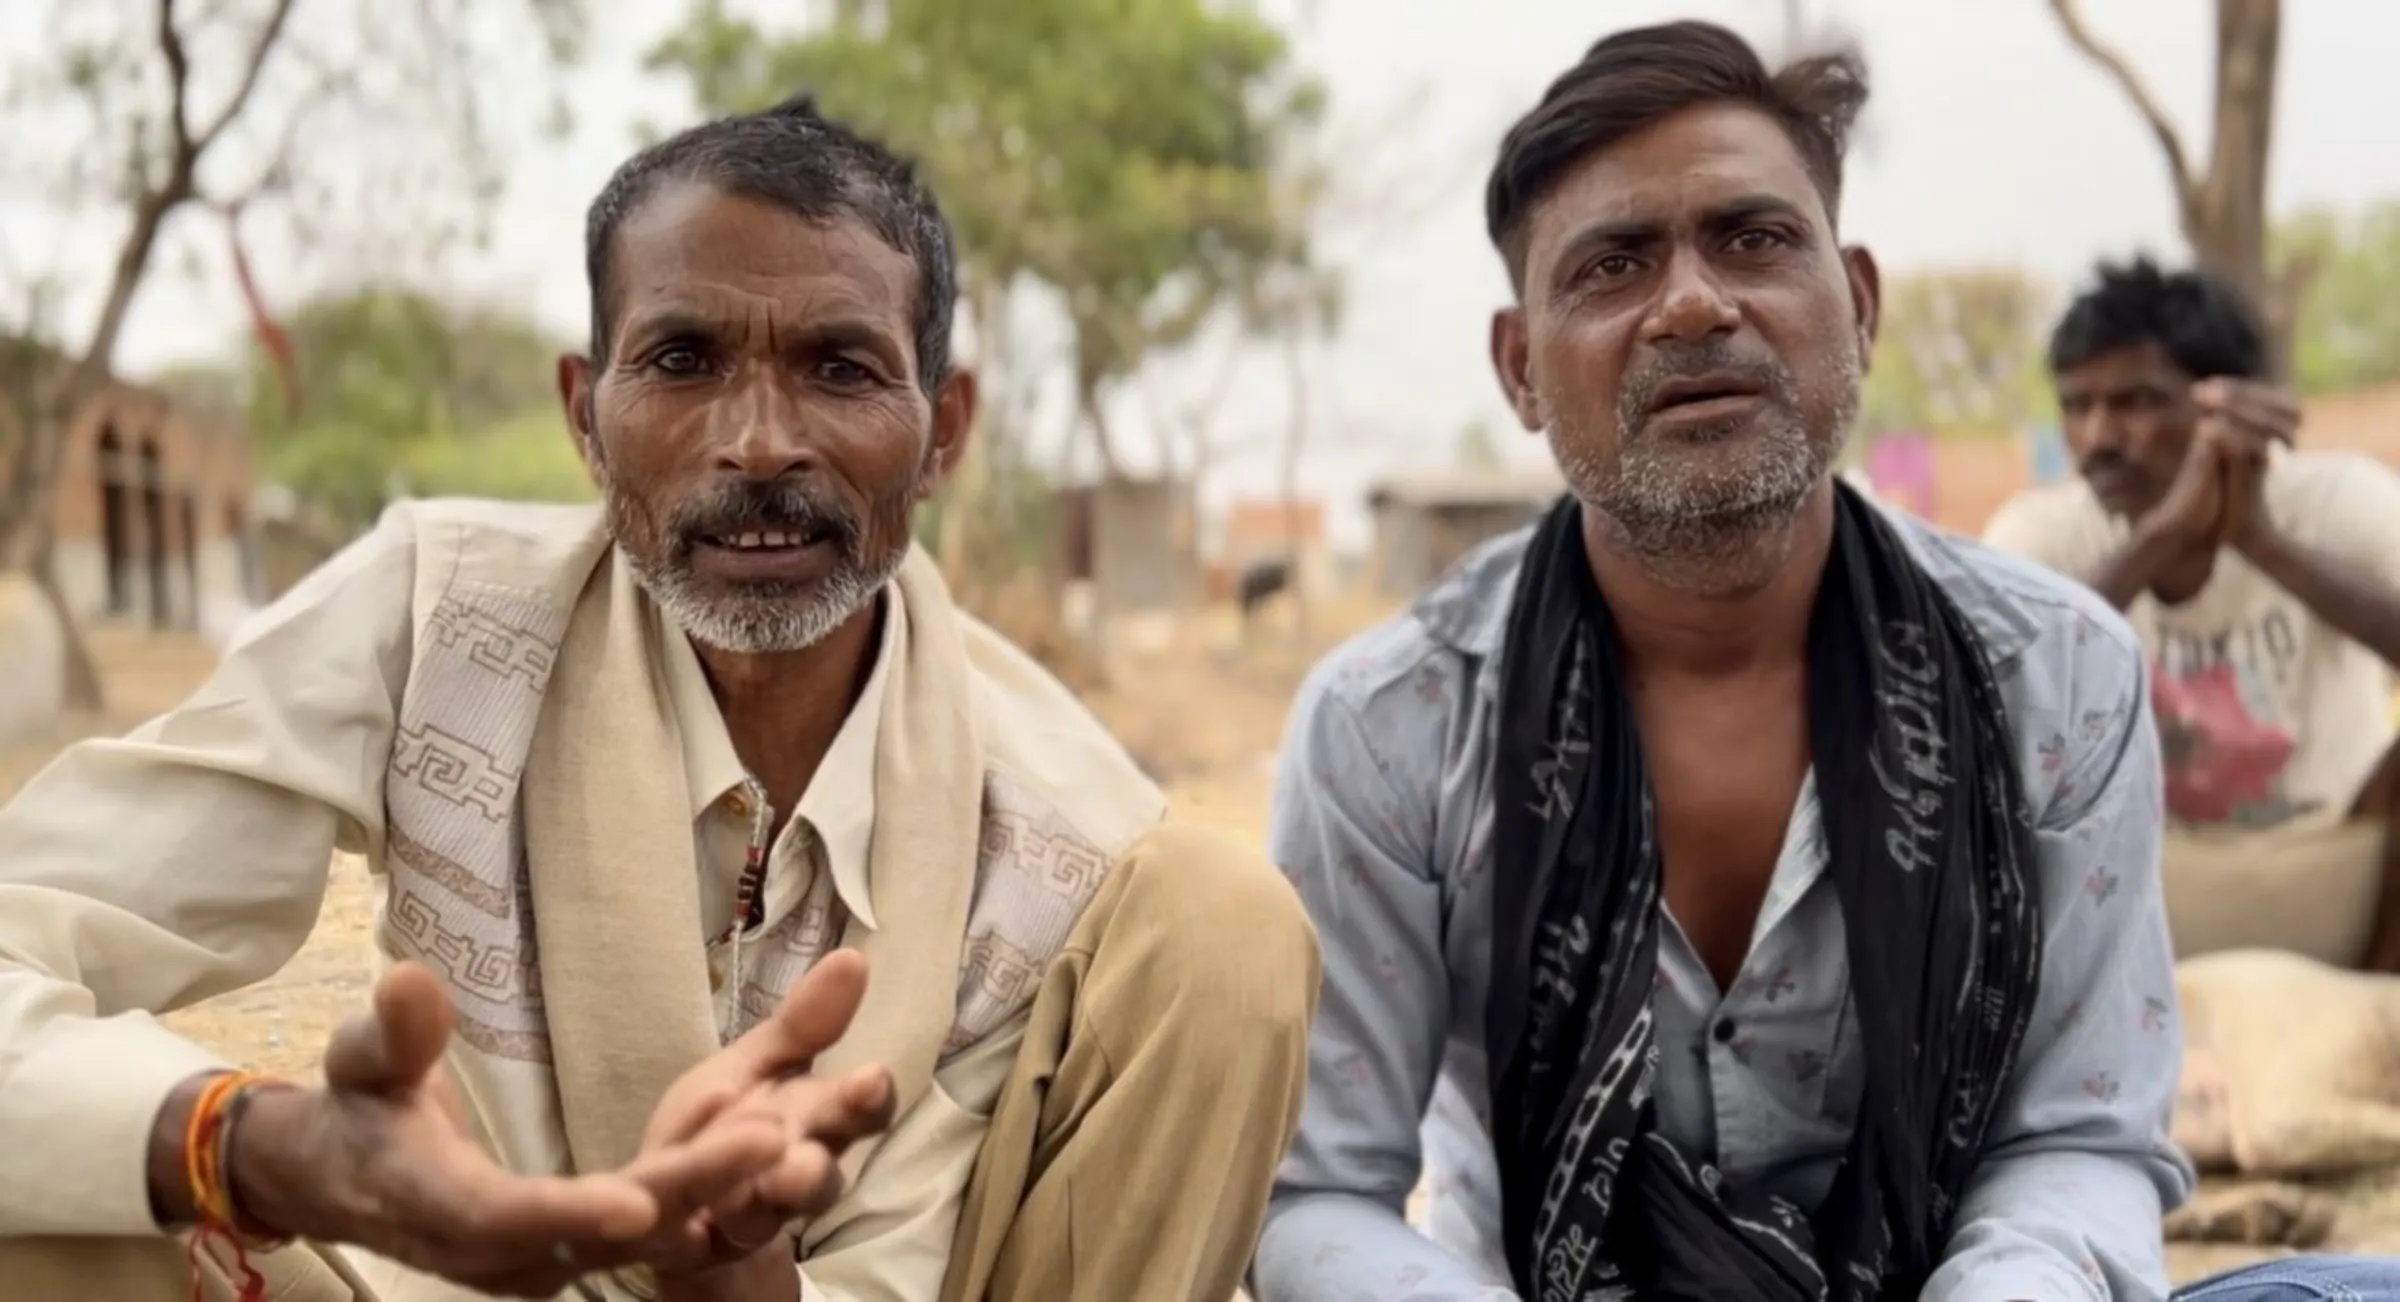 Migrant construction labourers Ram Kishor (left) and Manoj Kumar (right) are shown sitting together in Banda, India, May 15, 2024. Thomson Reuters Foundation/Bhasker Tripathi